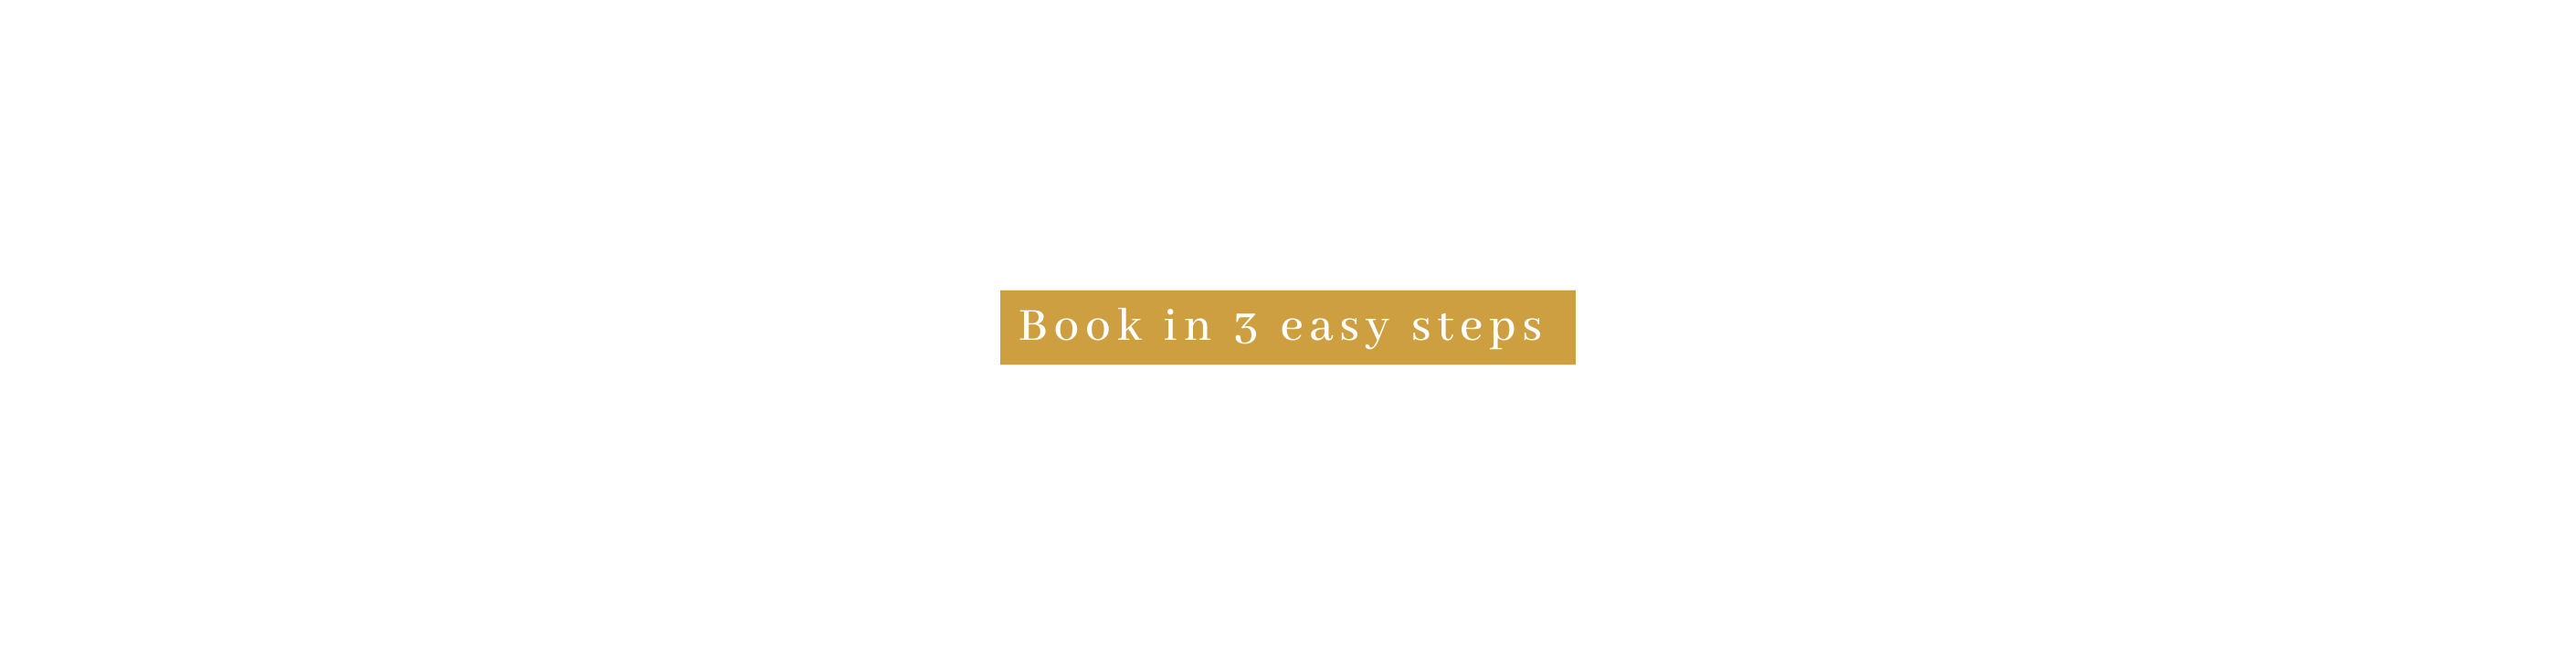 Book in 3 easy steps